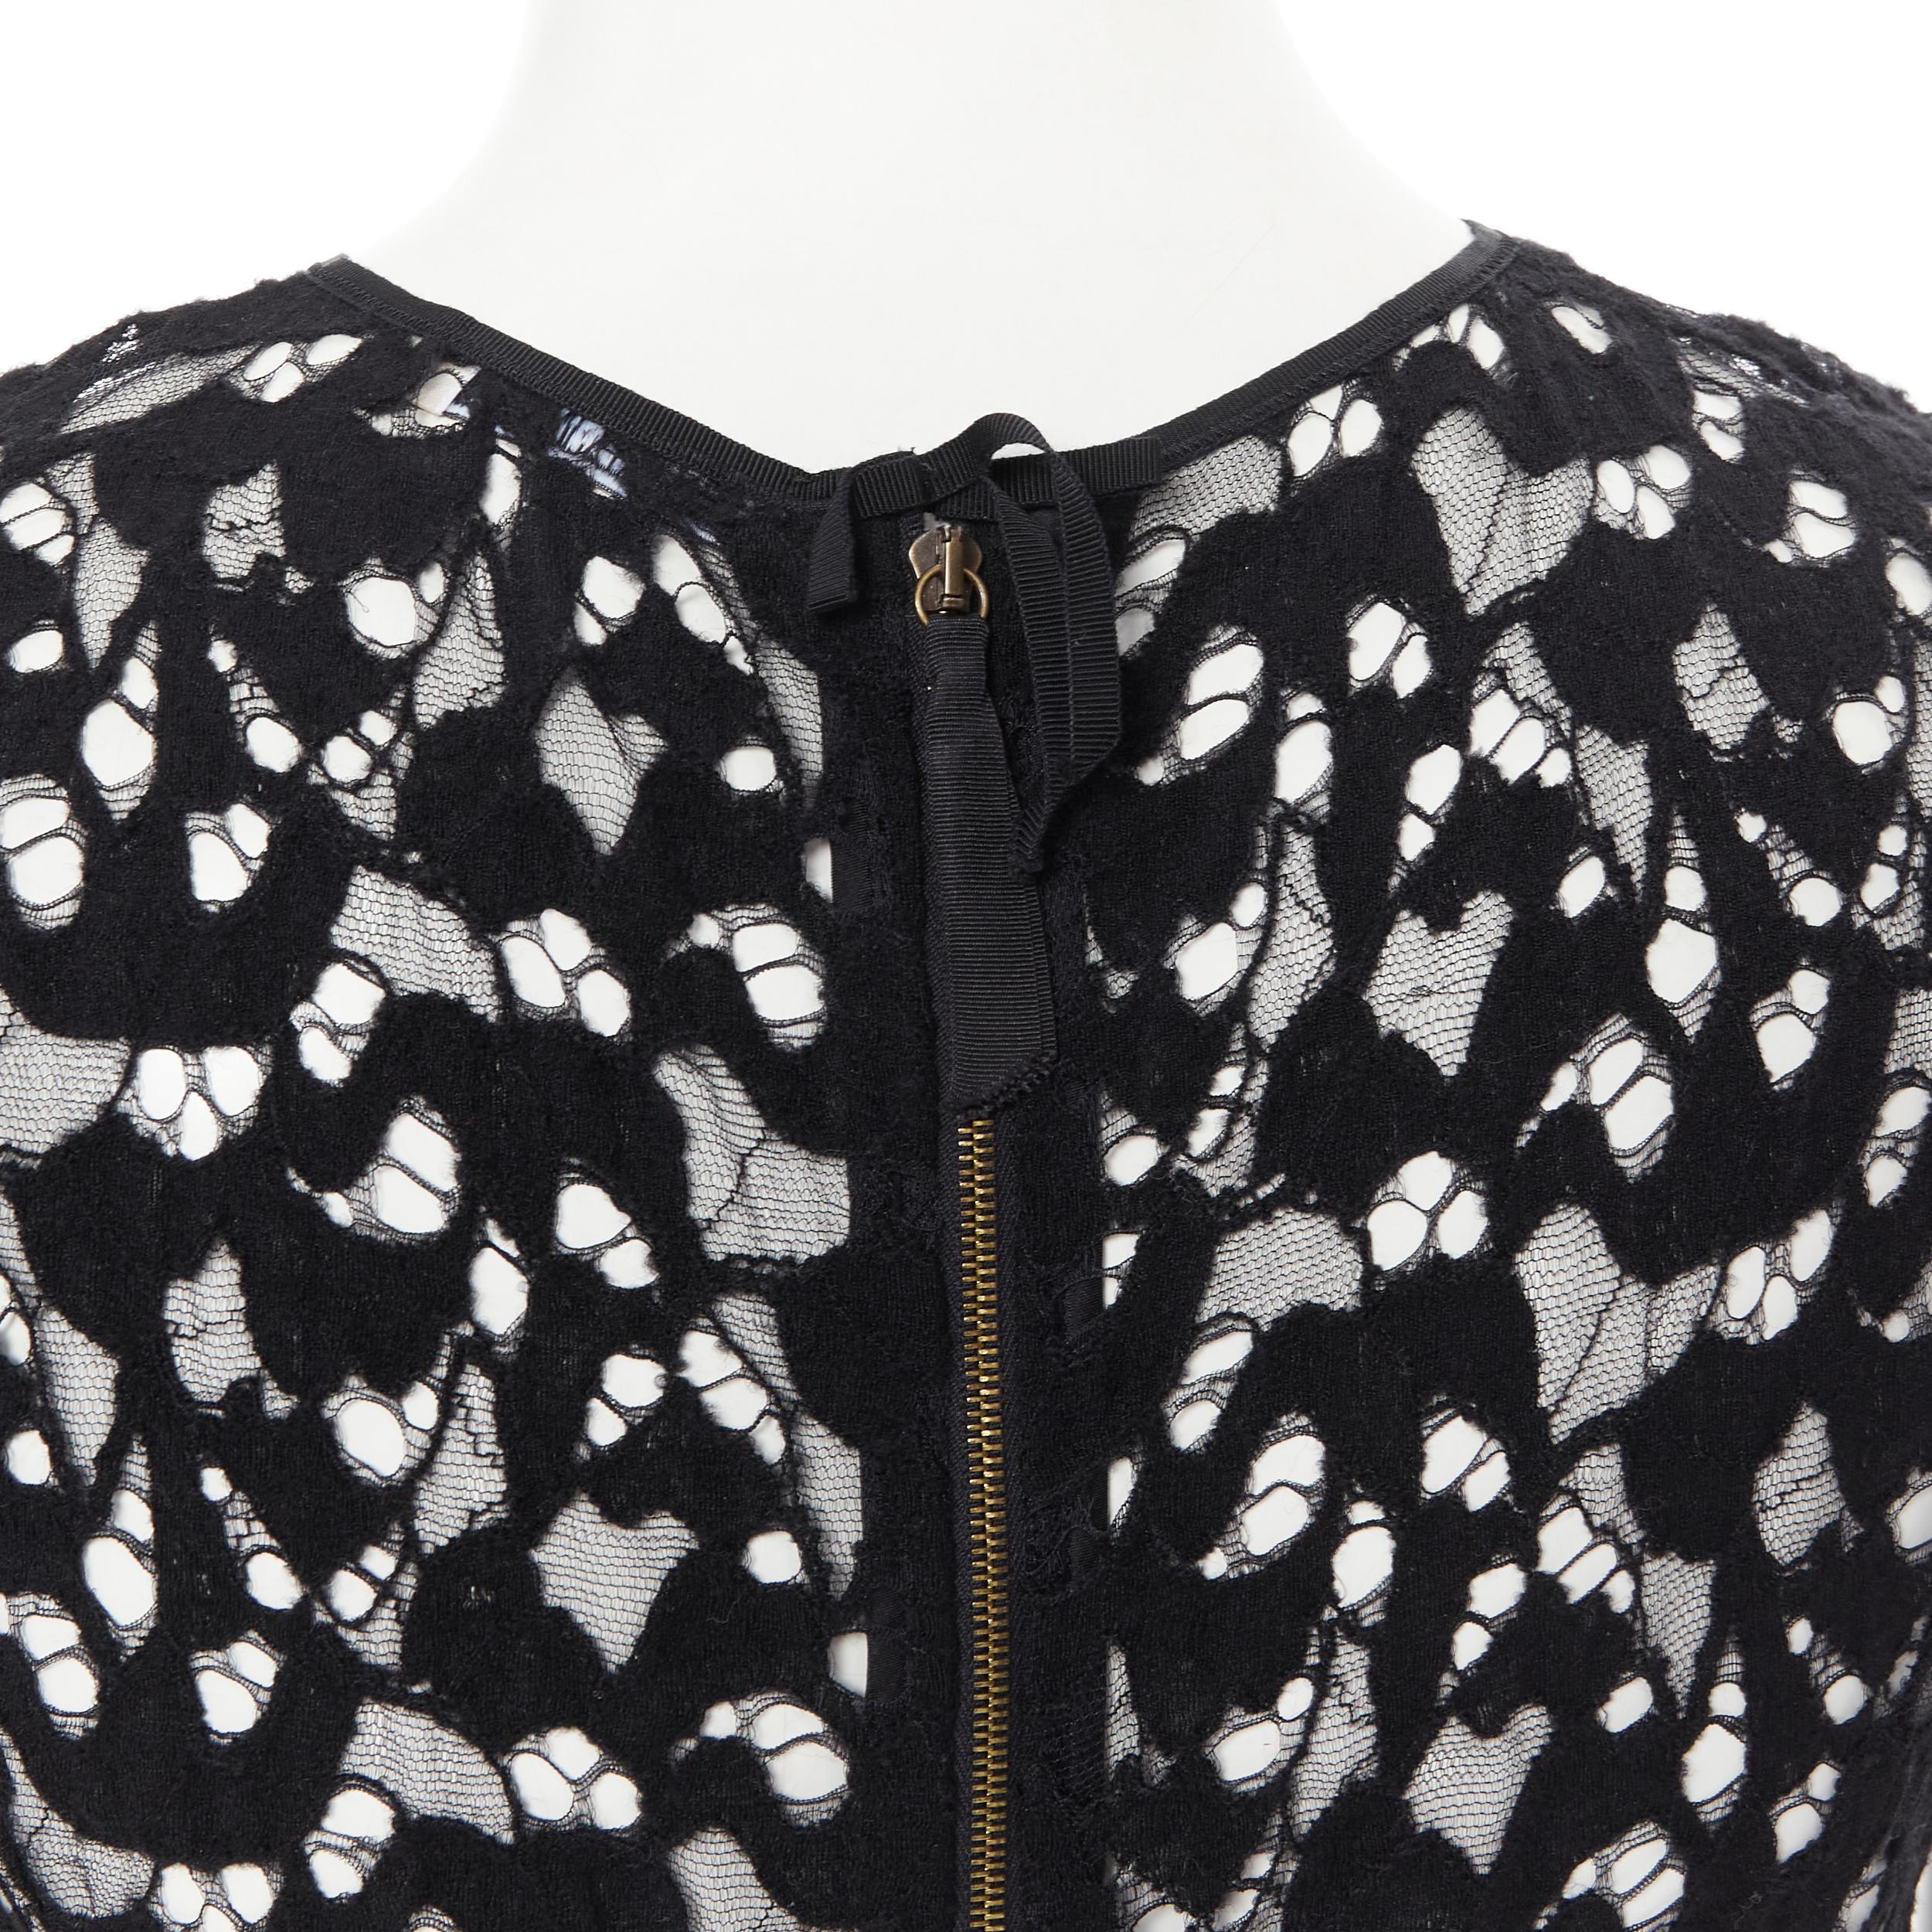 NINA RICCI black sheer lace cap sleeve zip back T-shirt top FR40 XS 
Reference: LNKO/A01830 
Brand: Nina Ricci 
Color: Black 
Pattern: Solid 
Closure: Zip 
Extra Detail: Zip back closure. 
Made in: France 

CONDITION: 
Condition: Excellent, this